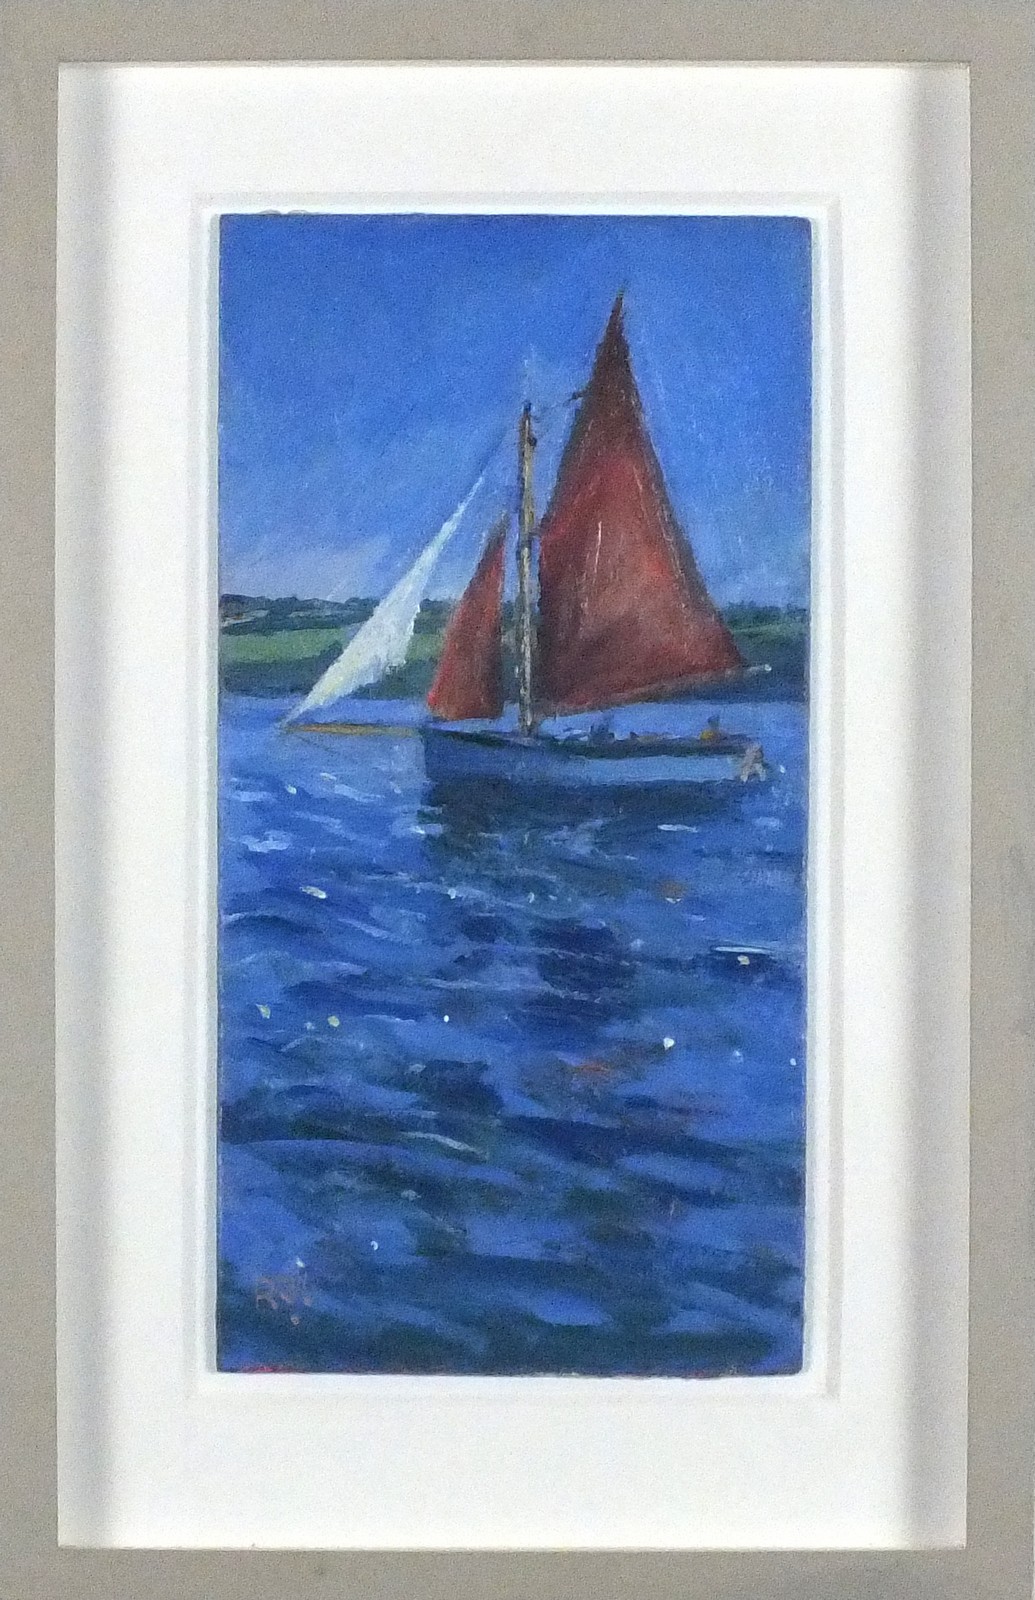 Robert JONES (British b. 1943) Oyster Boat near Mylor, Oil on board, Signed with initials lower - Image 2 of 2